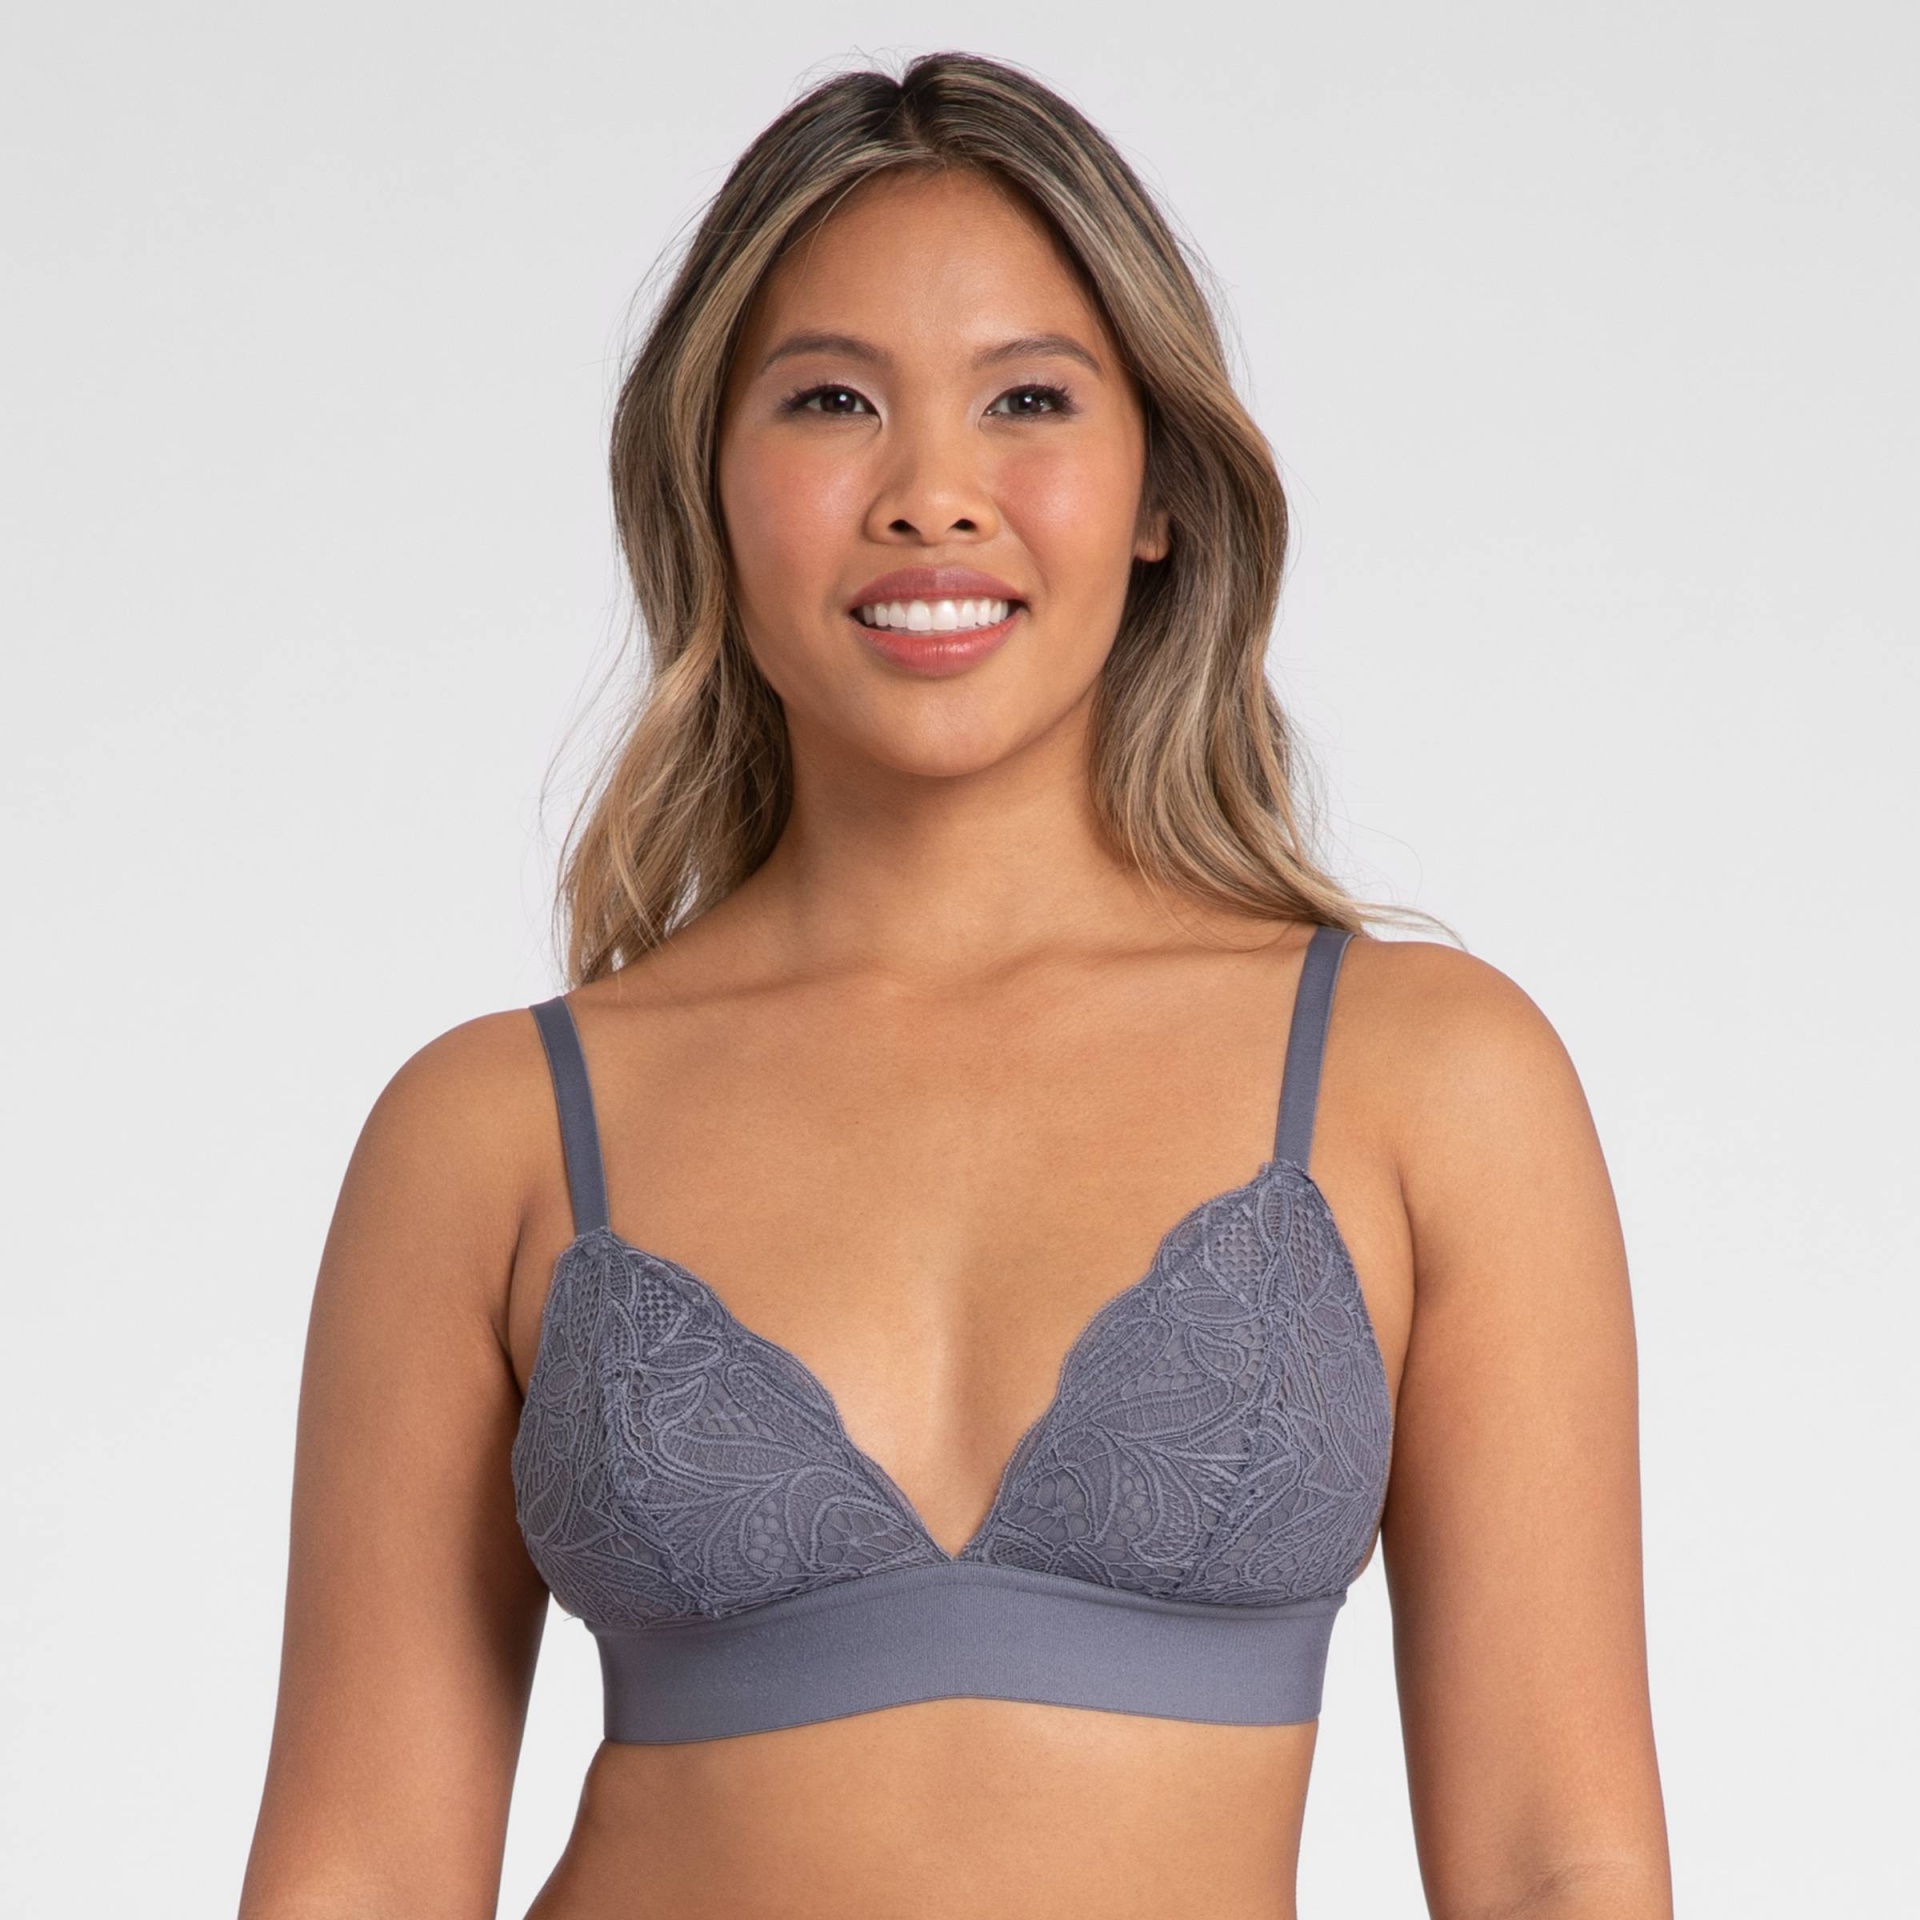 All.You.LIVELY All.You. LIVELY Women's Long-Lined Lace Bralette - Smoke S 1  ct